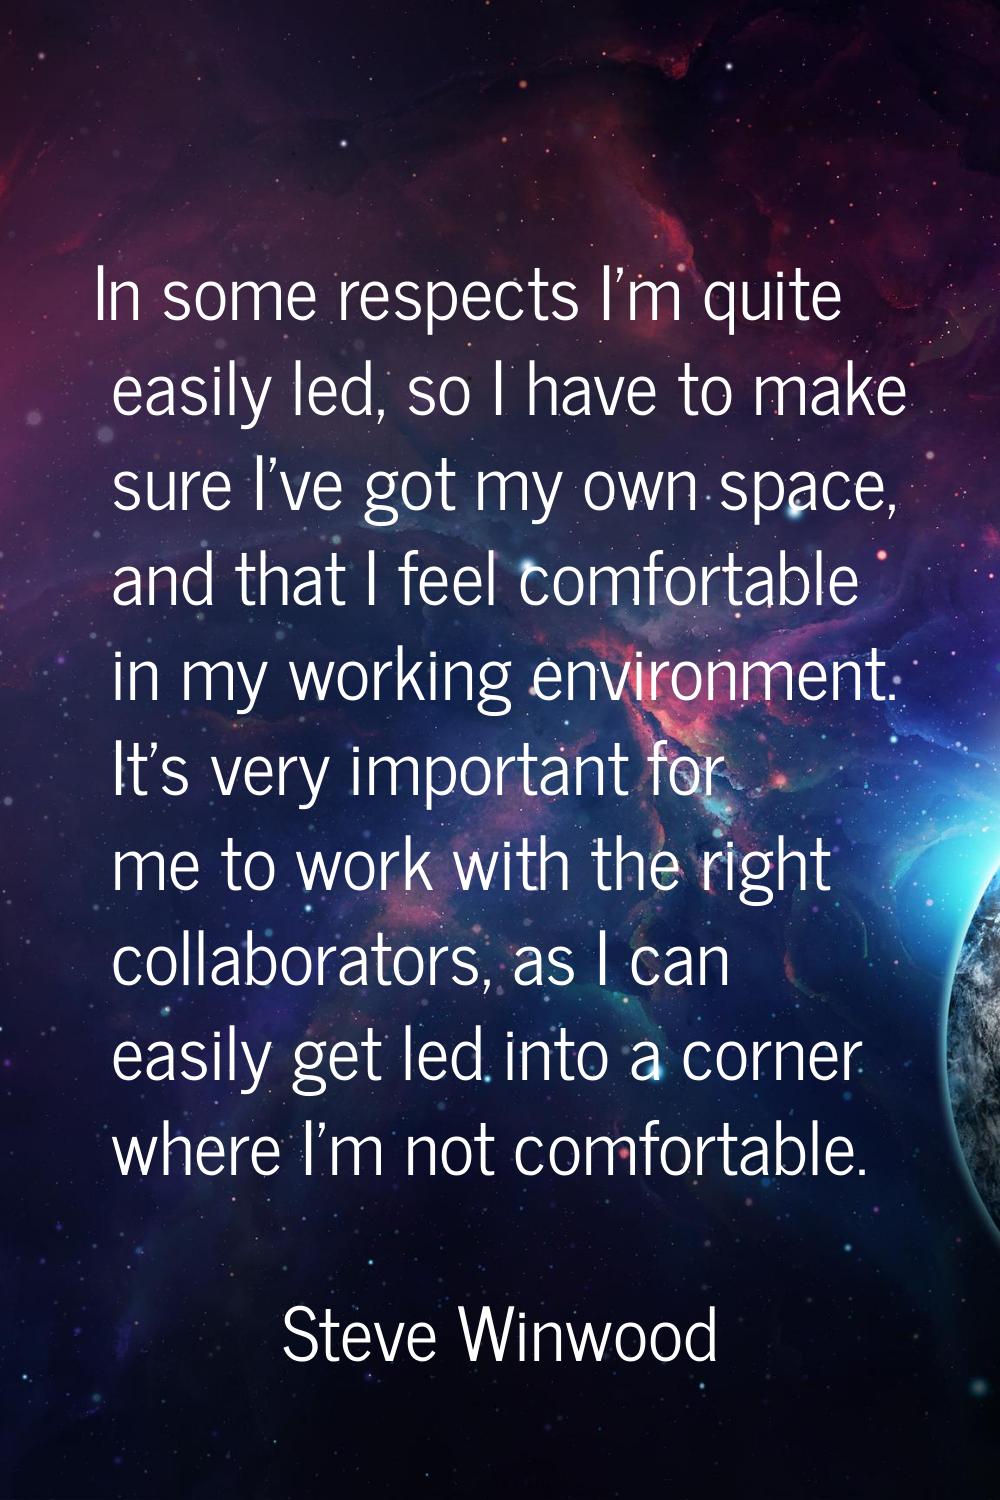 In some respects I'm quite easily led, so I have to make sure I've got my own space, and that I fee